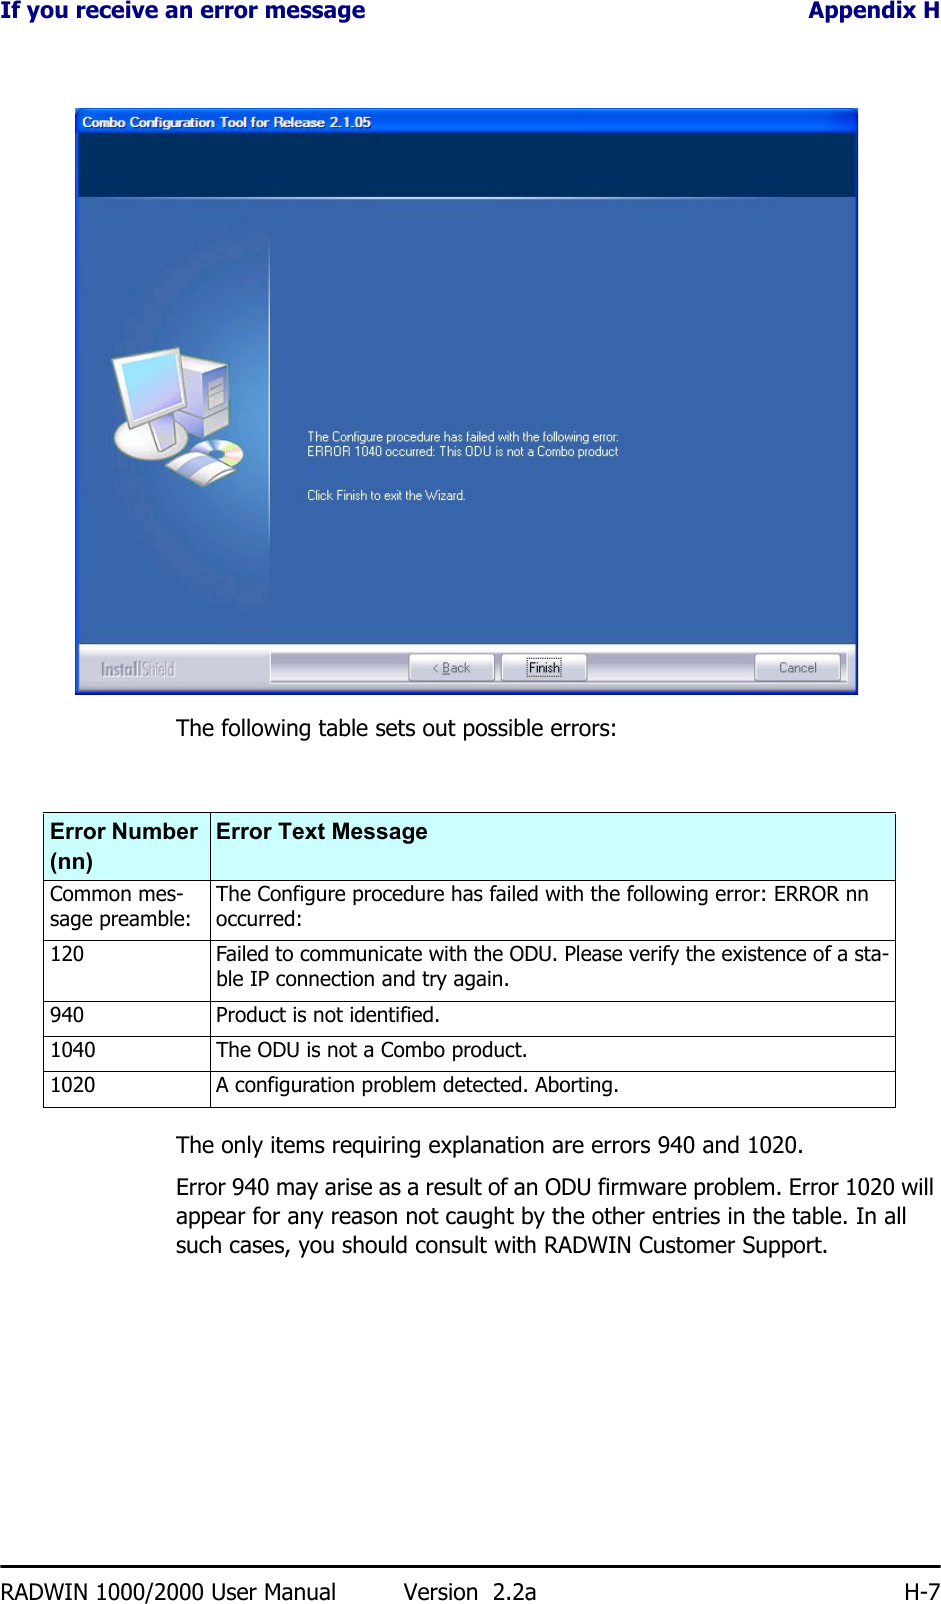 If you receive an error message Appendix HRADWIN 1000/2000 User Manual Version  2.2a H-7The following table sets out possible errors:The only items requiring explanation are errors 940 and 1020.Error 940 may arise as a result of an ODU firmware problem. Error 1020 will appear for any reason not caught by the other entries in the table. In all such cases, you should consult with RADWIN Customer Support.Error Number (nn)Error Text MessageCommon mes-sage preamble: The Configure procedure has failed with the following error: ERROR nn occurred:120 Failed to communicate with the ODU. Please verify the existence of a sta-ble IP connection and try again.940 Product is not identified.1040 The ODU is not a Combo product.1020 A configuration problem detected. Aborting.